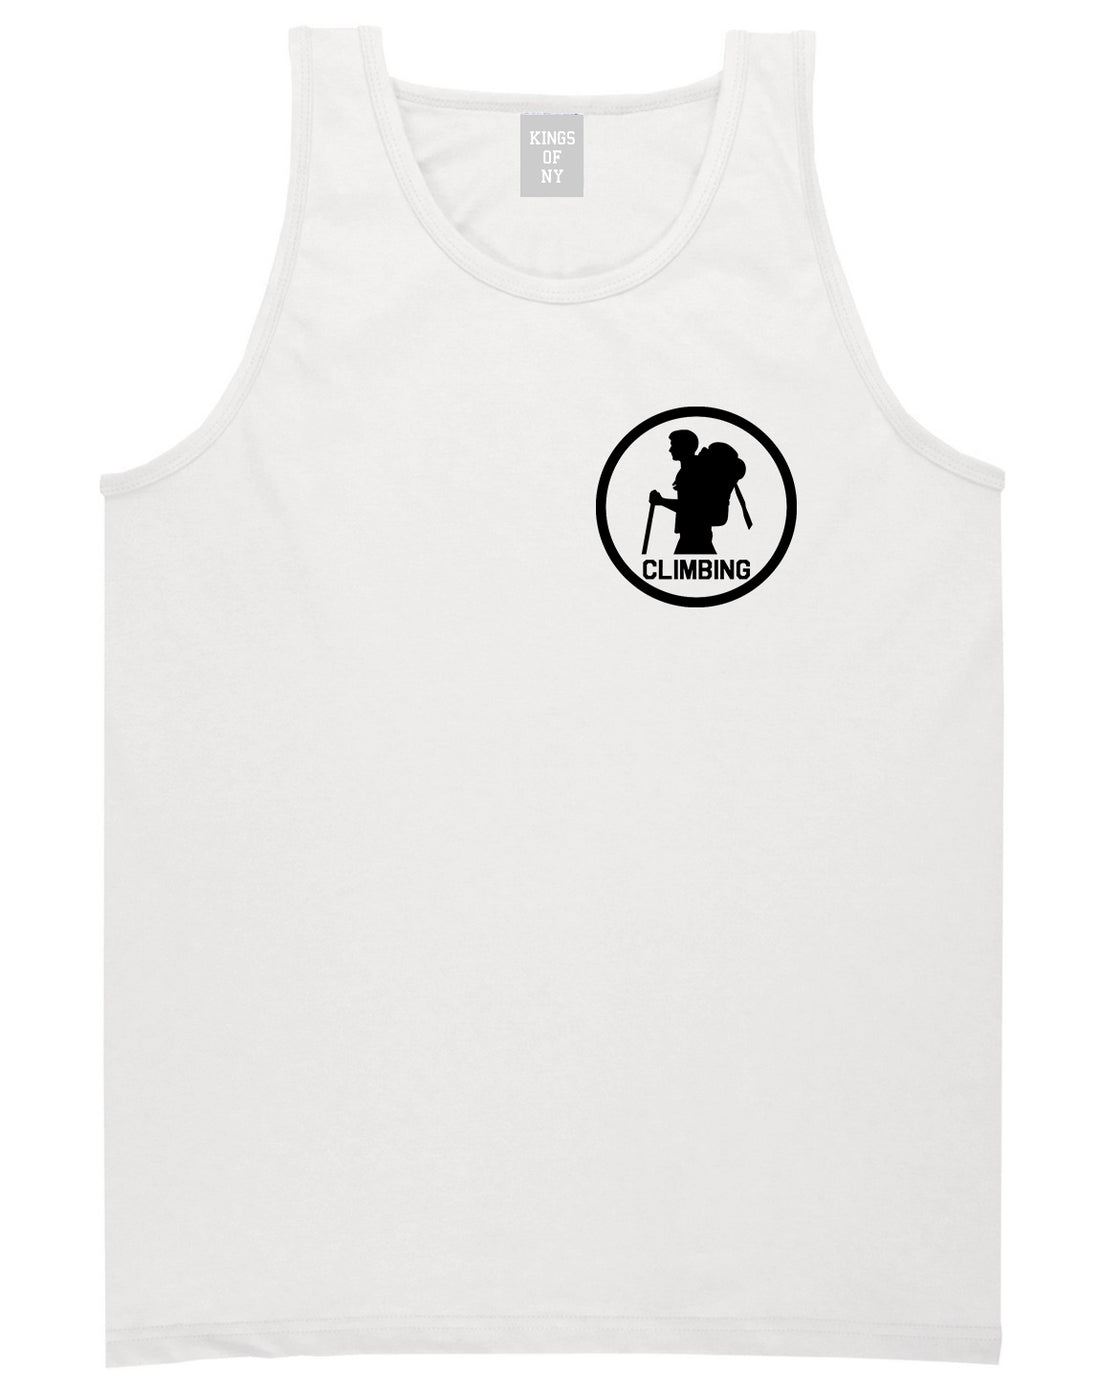 Climbing Hiker Chest White Tank Top Shirt by Kings Of NY